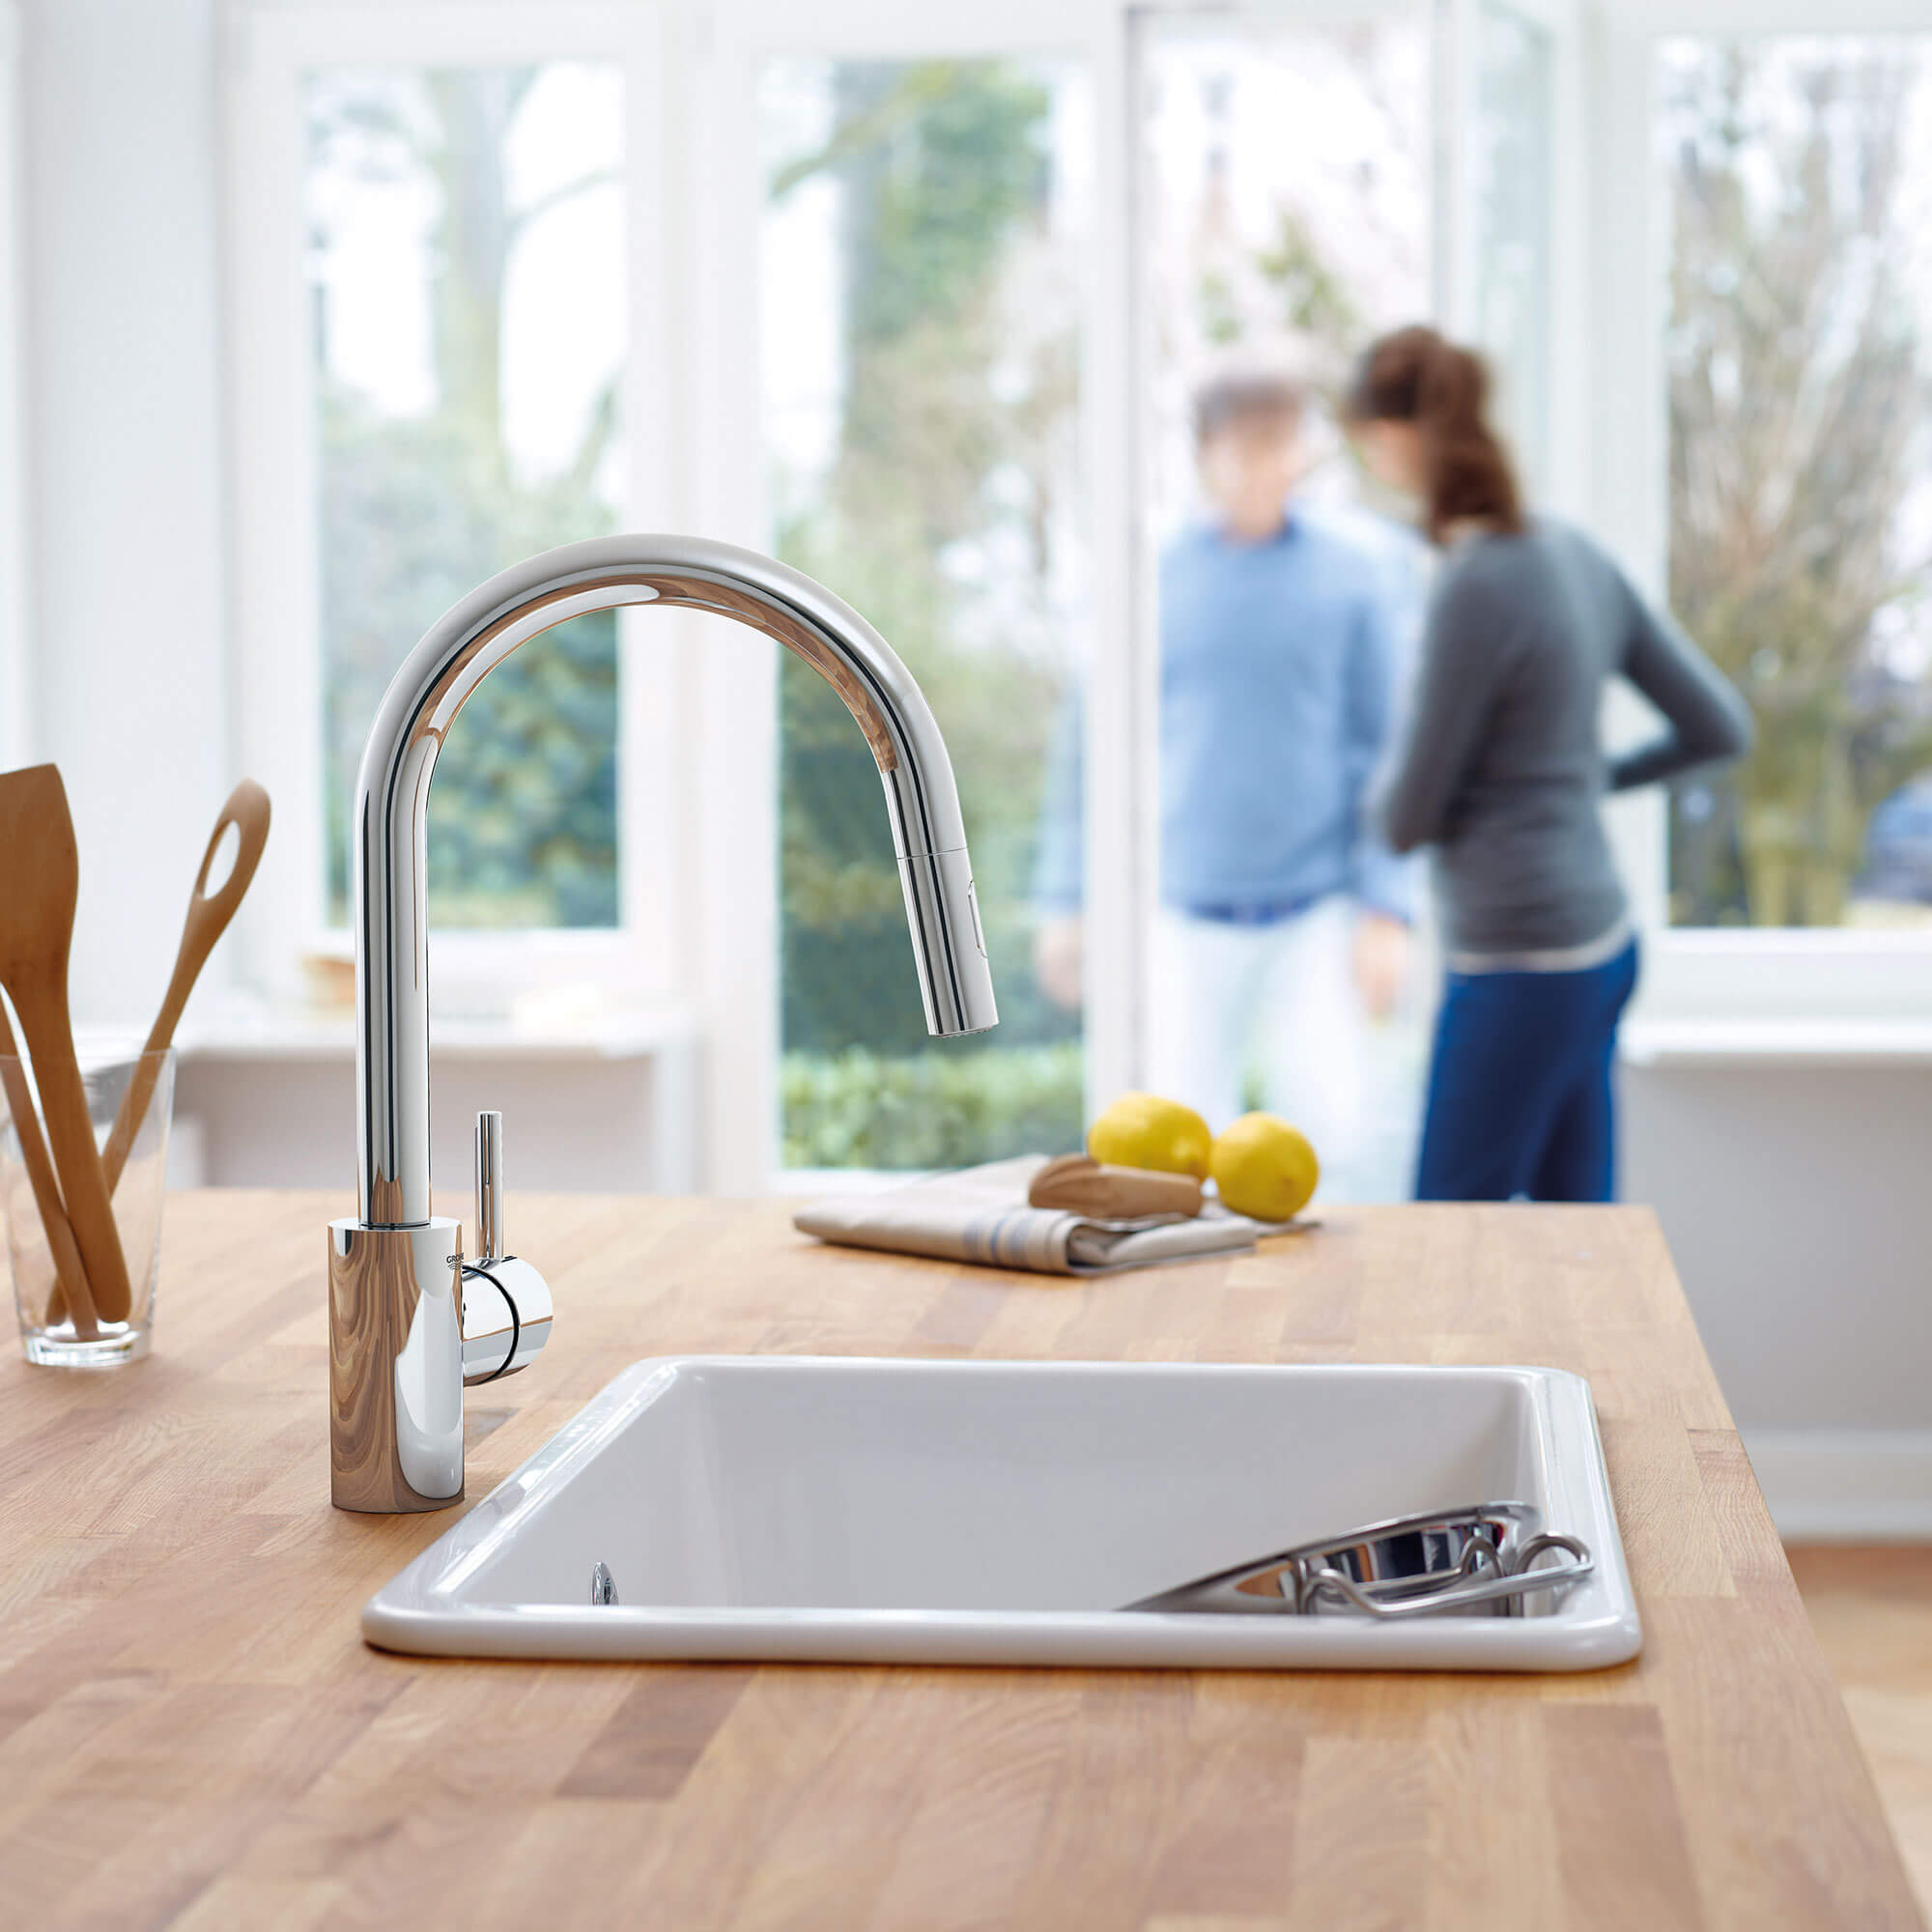 Concetta Kitchen Faucet in Kitchen with People Opening a Door